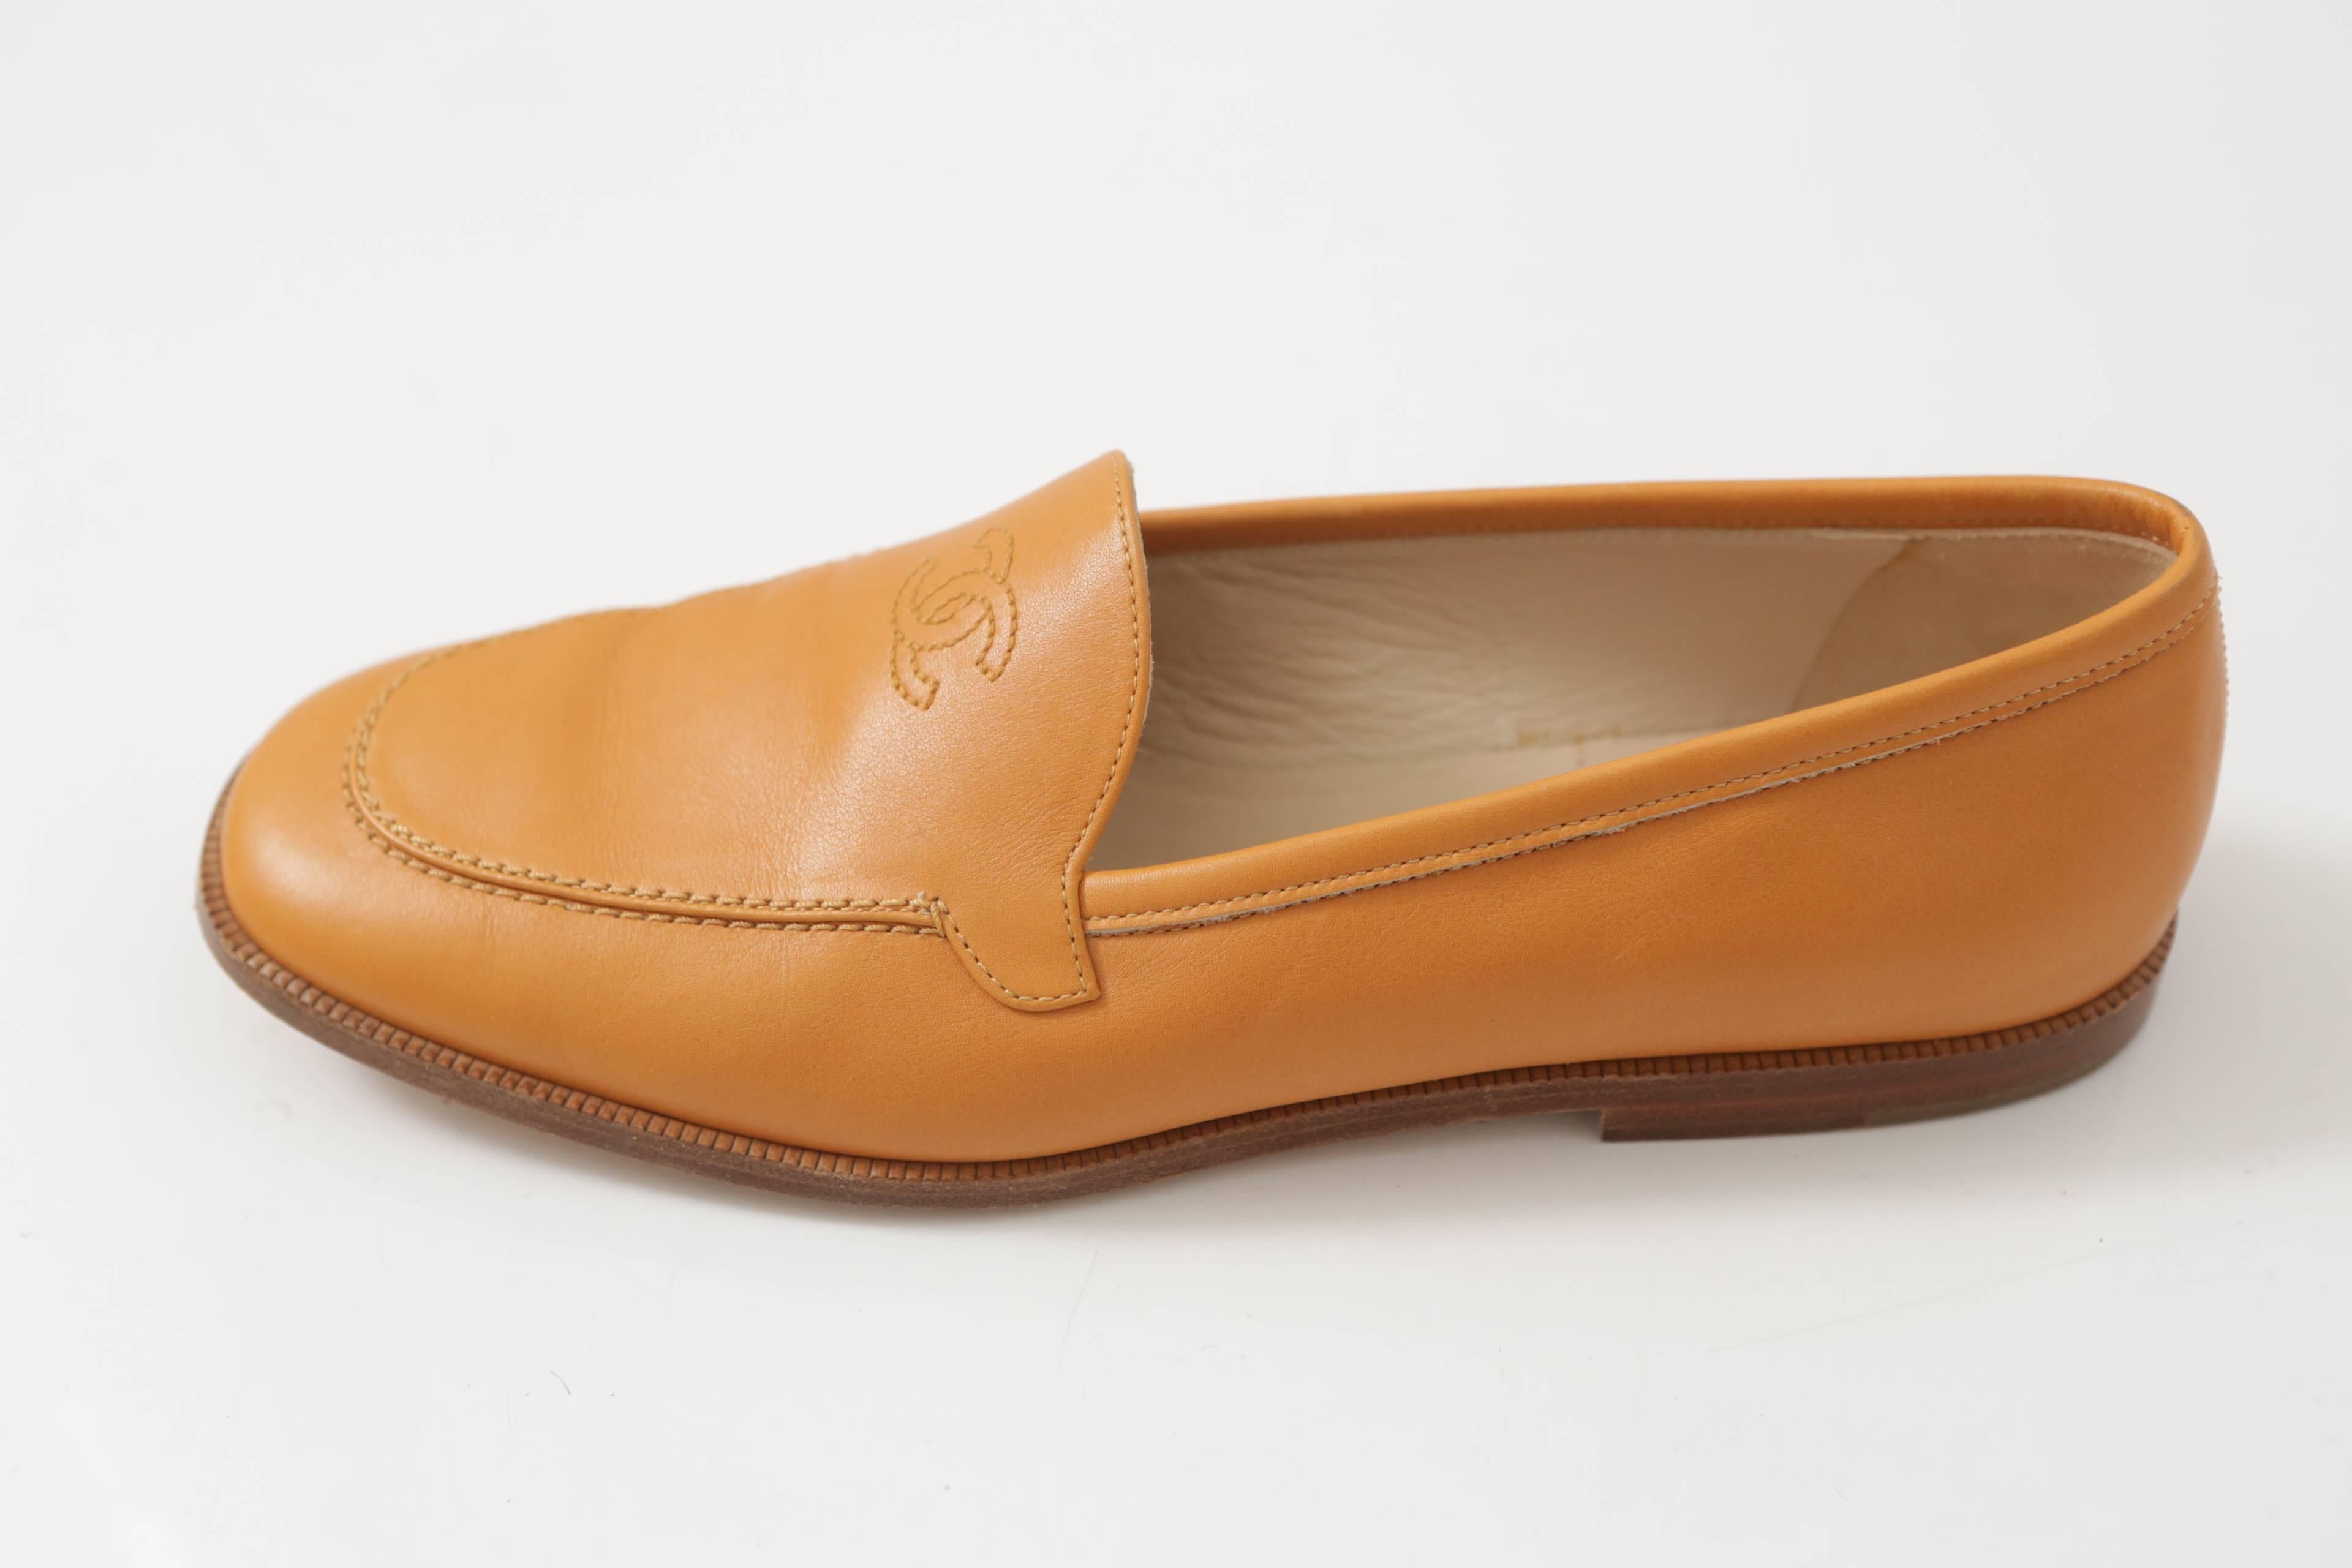 Chanel Tan Leather Loafer W/ 'CC' Logo 2